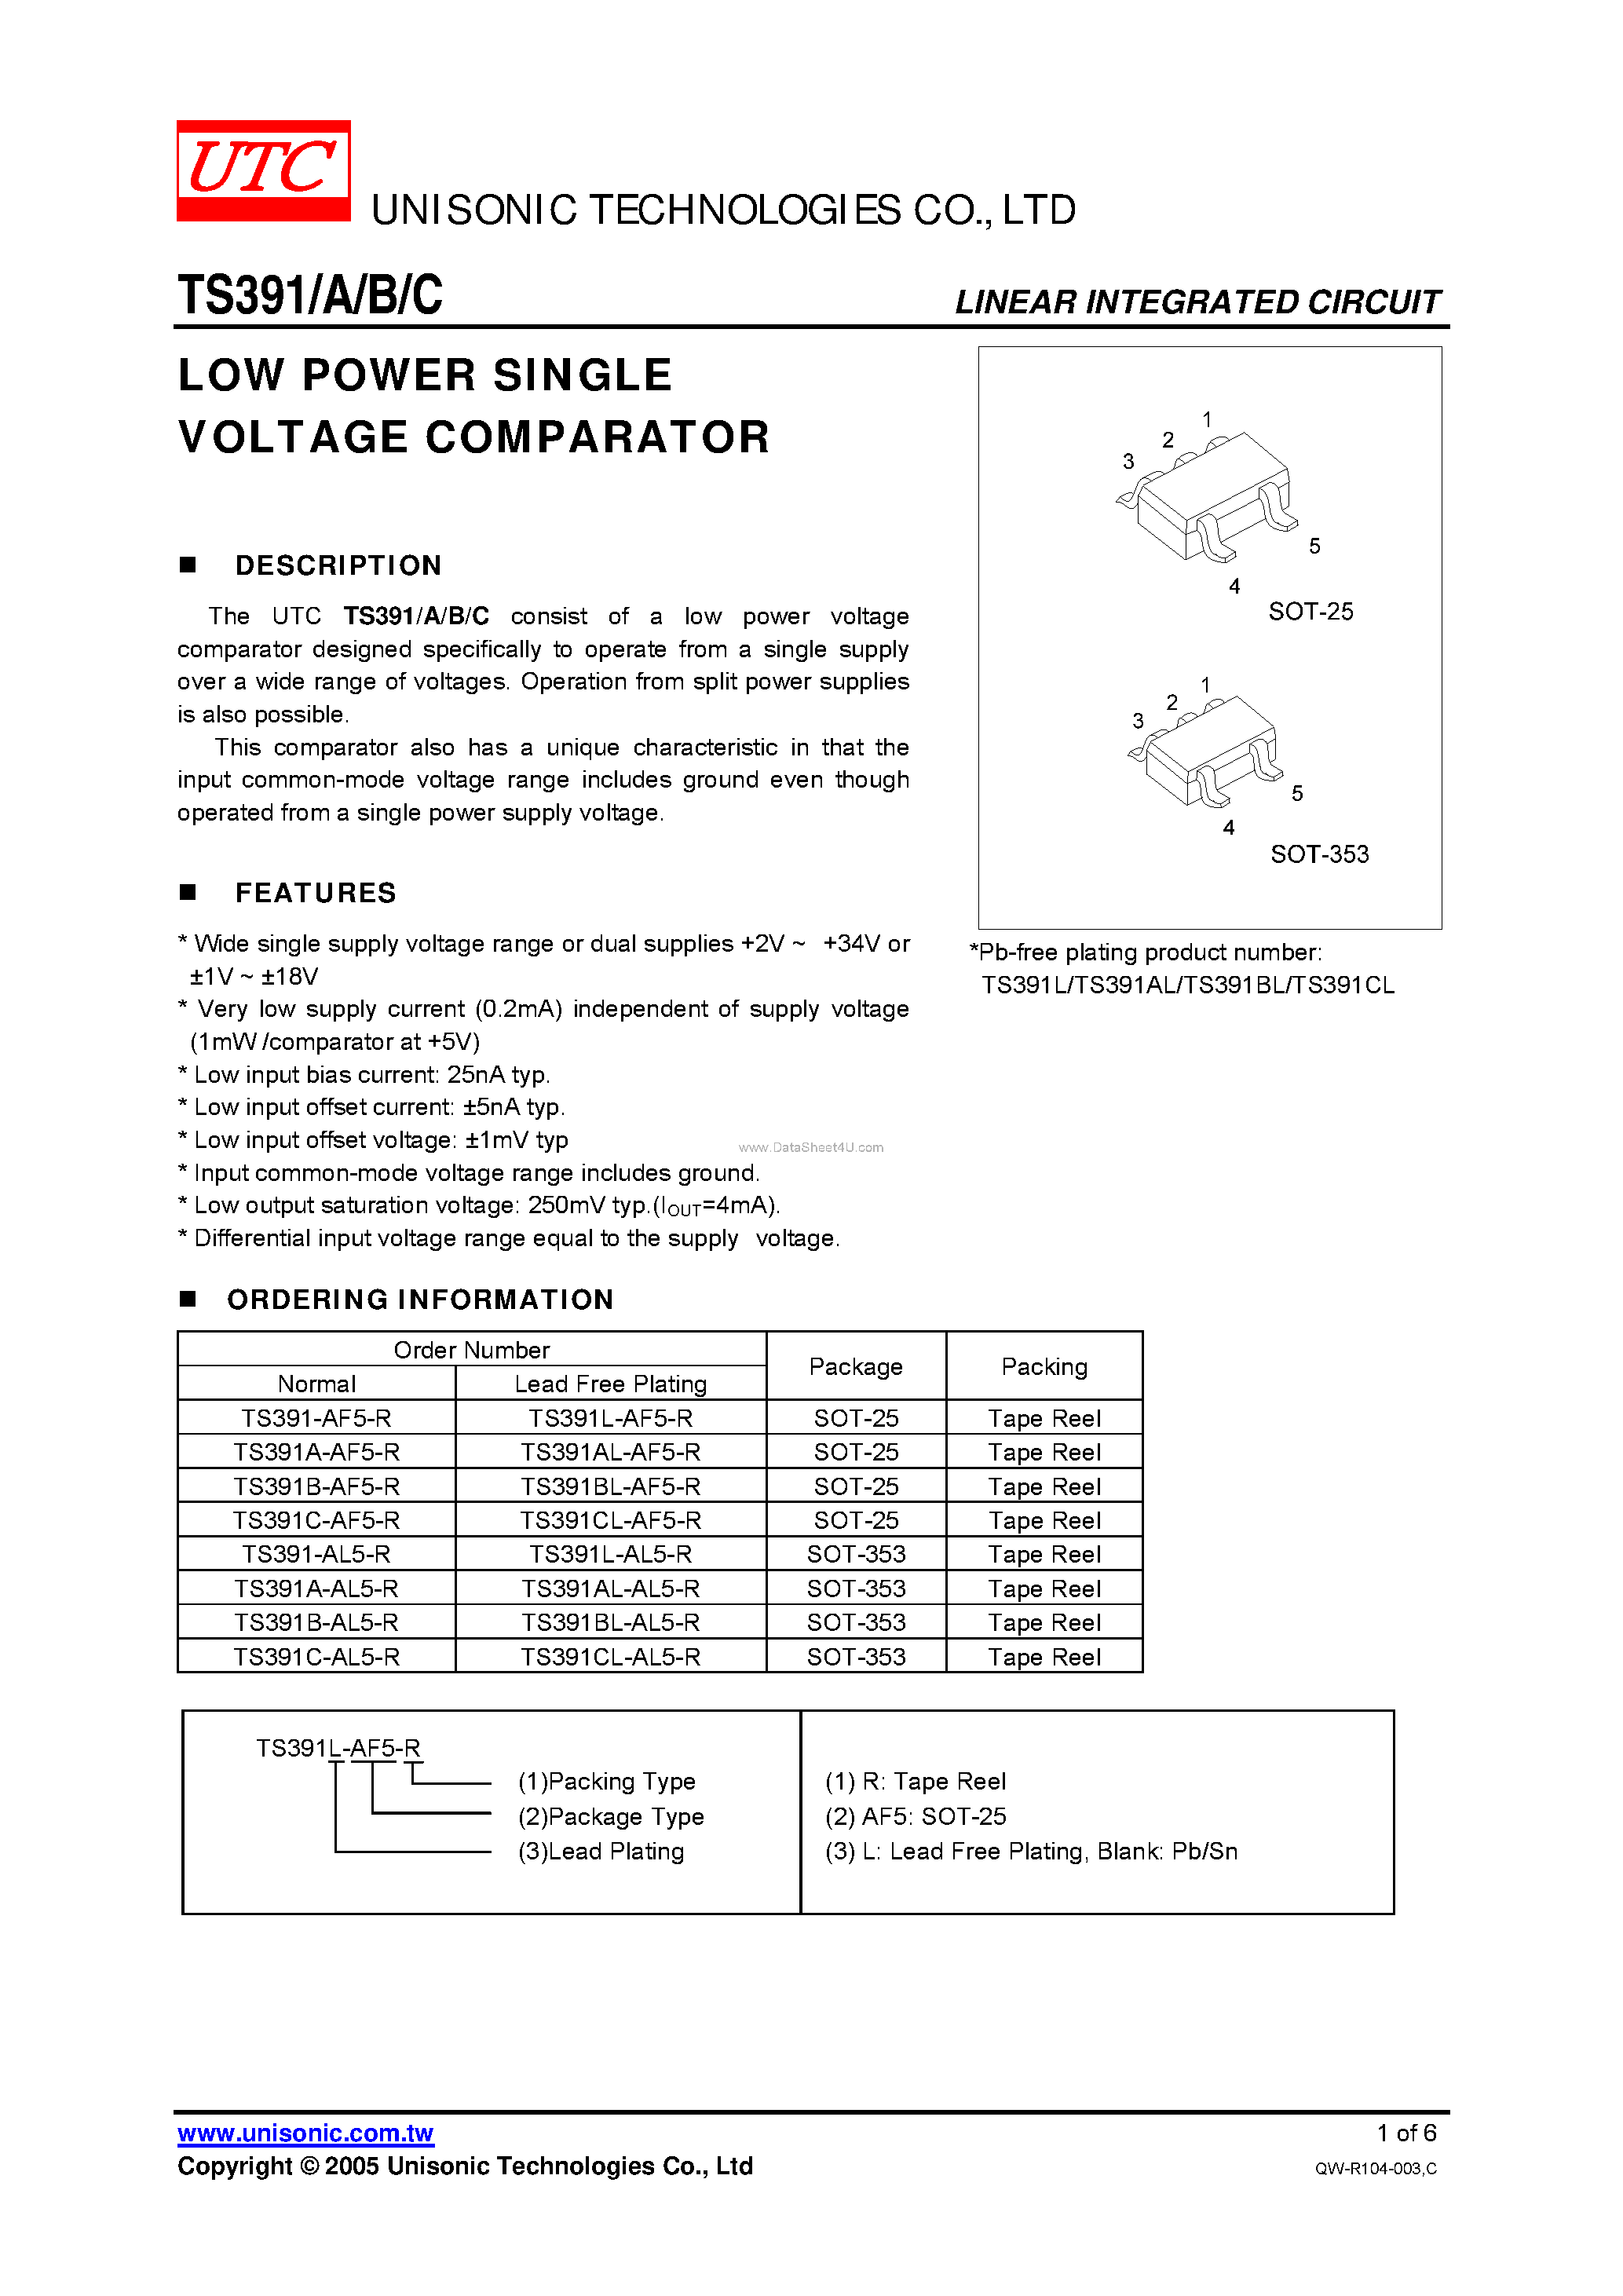 Datasheet TS391 - LOW POWER SINGLE VOLTAGE COMPARATOR page 1